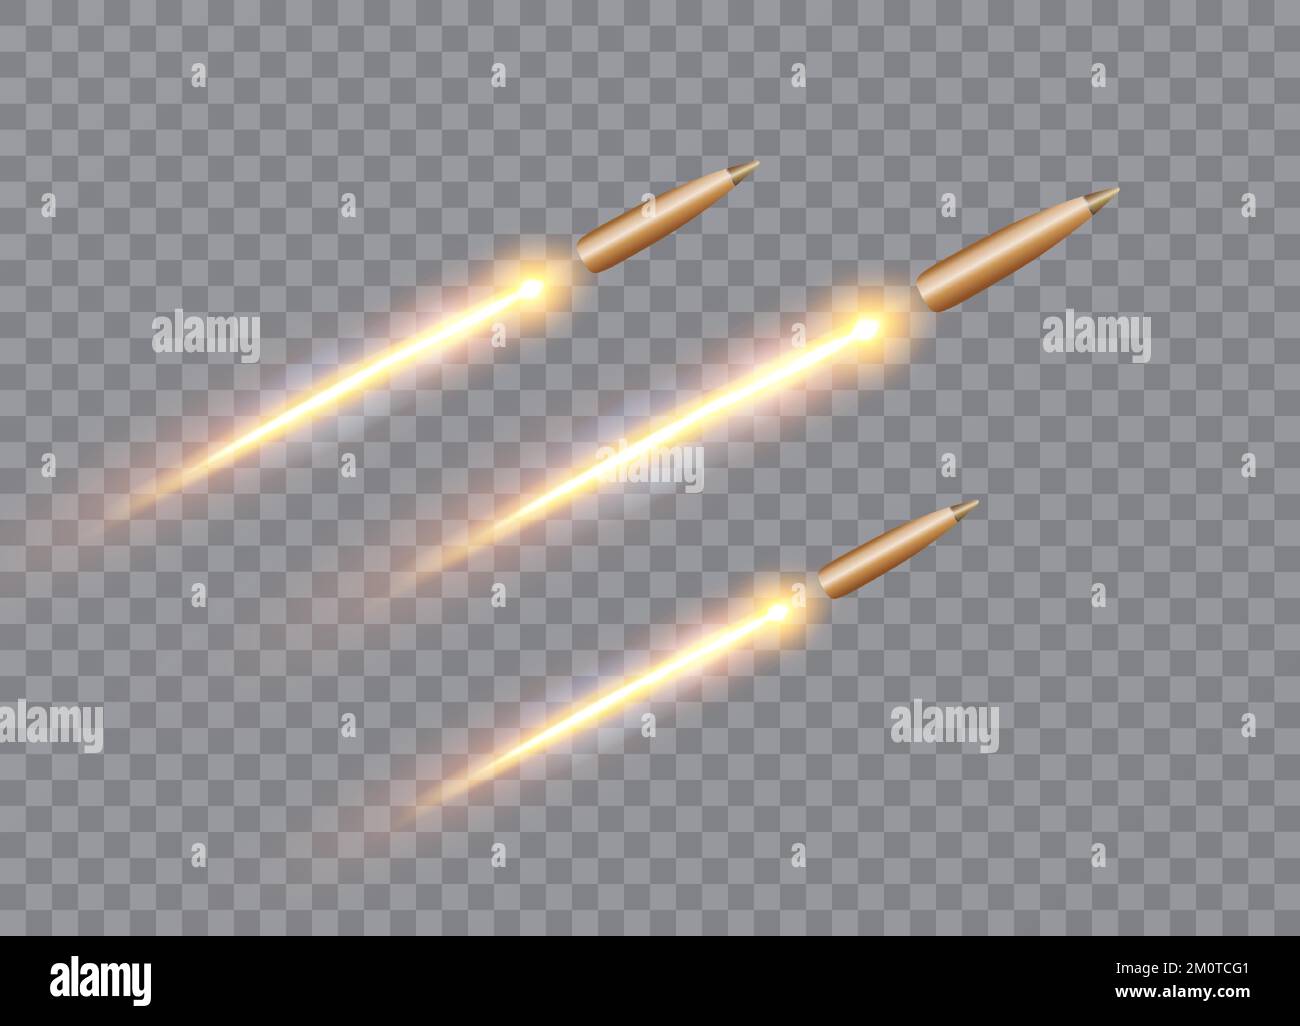 Realistic flying bullet in motion with the fiery trace. Vector illustration. Stock Vector